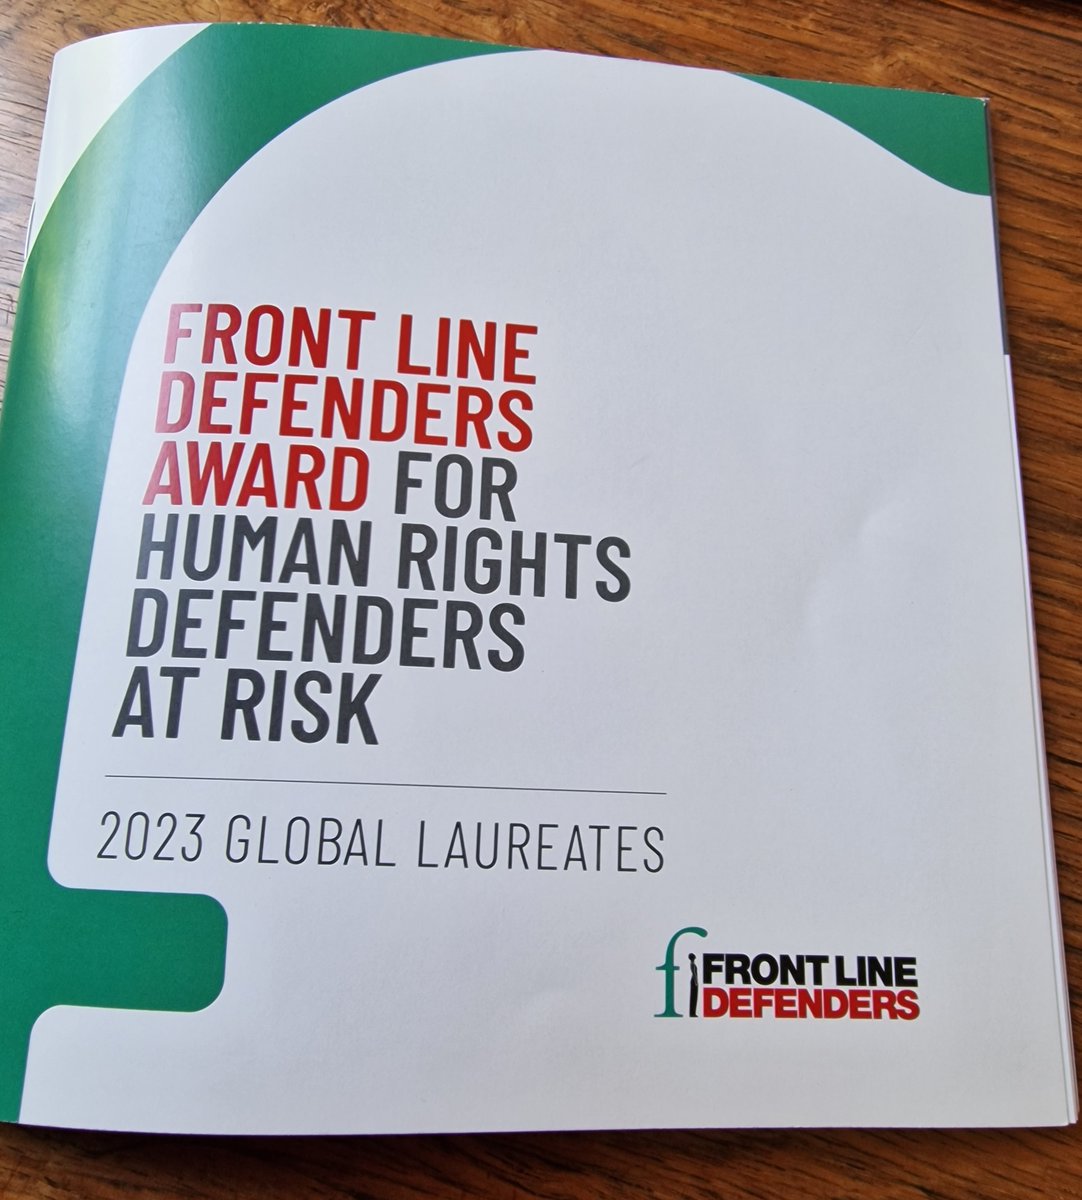 Humbled to attend #FLDAward23 hosted by Front Line Defenders at EPIC this morning. Congratulations to the 5 global laureates: these impressive Human Rights Defenders are an inspiration to us in an era of shrinking civic space.